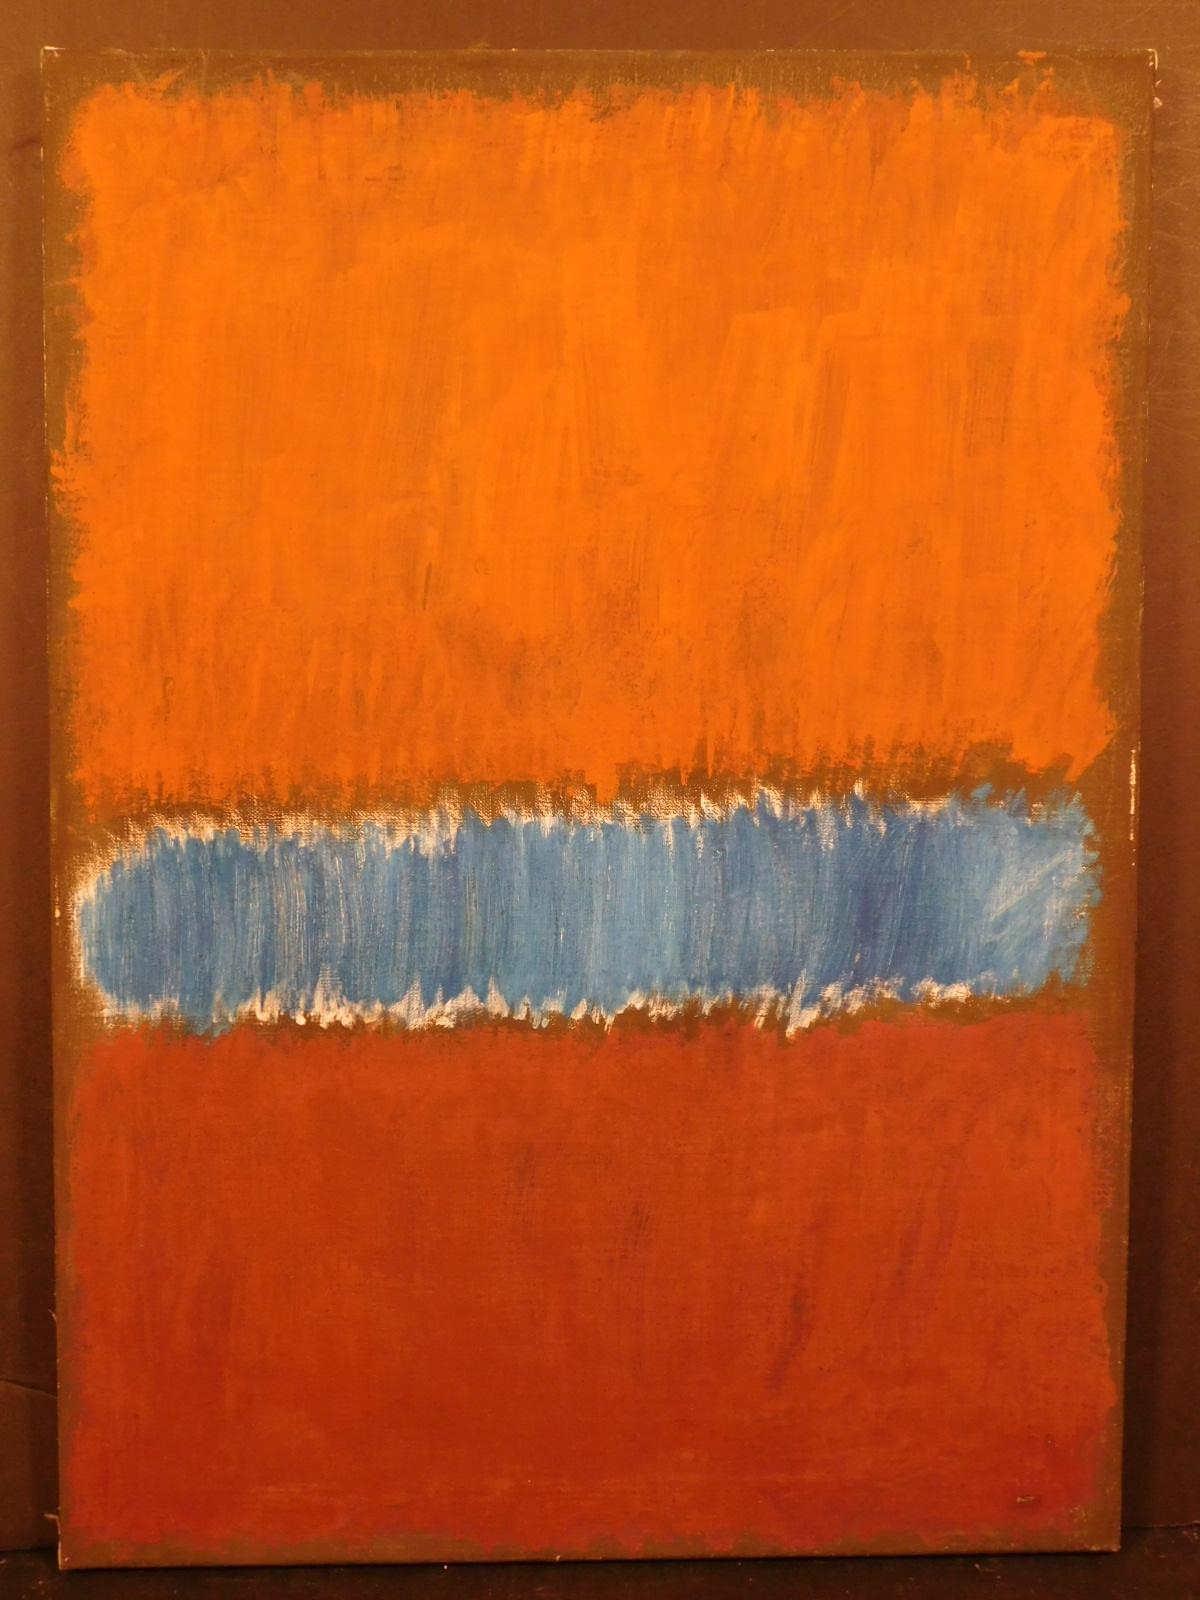 Color Field by Mark Rothko, 1969